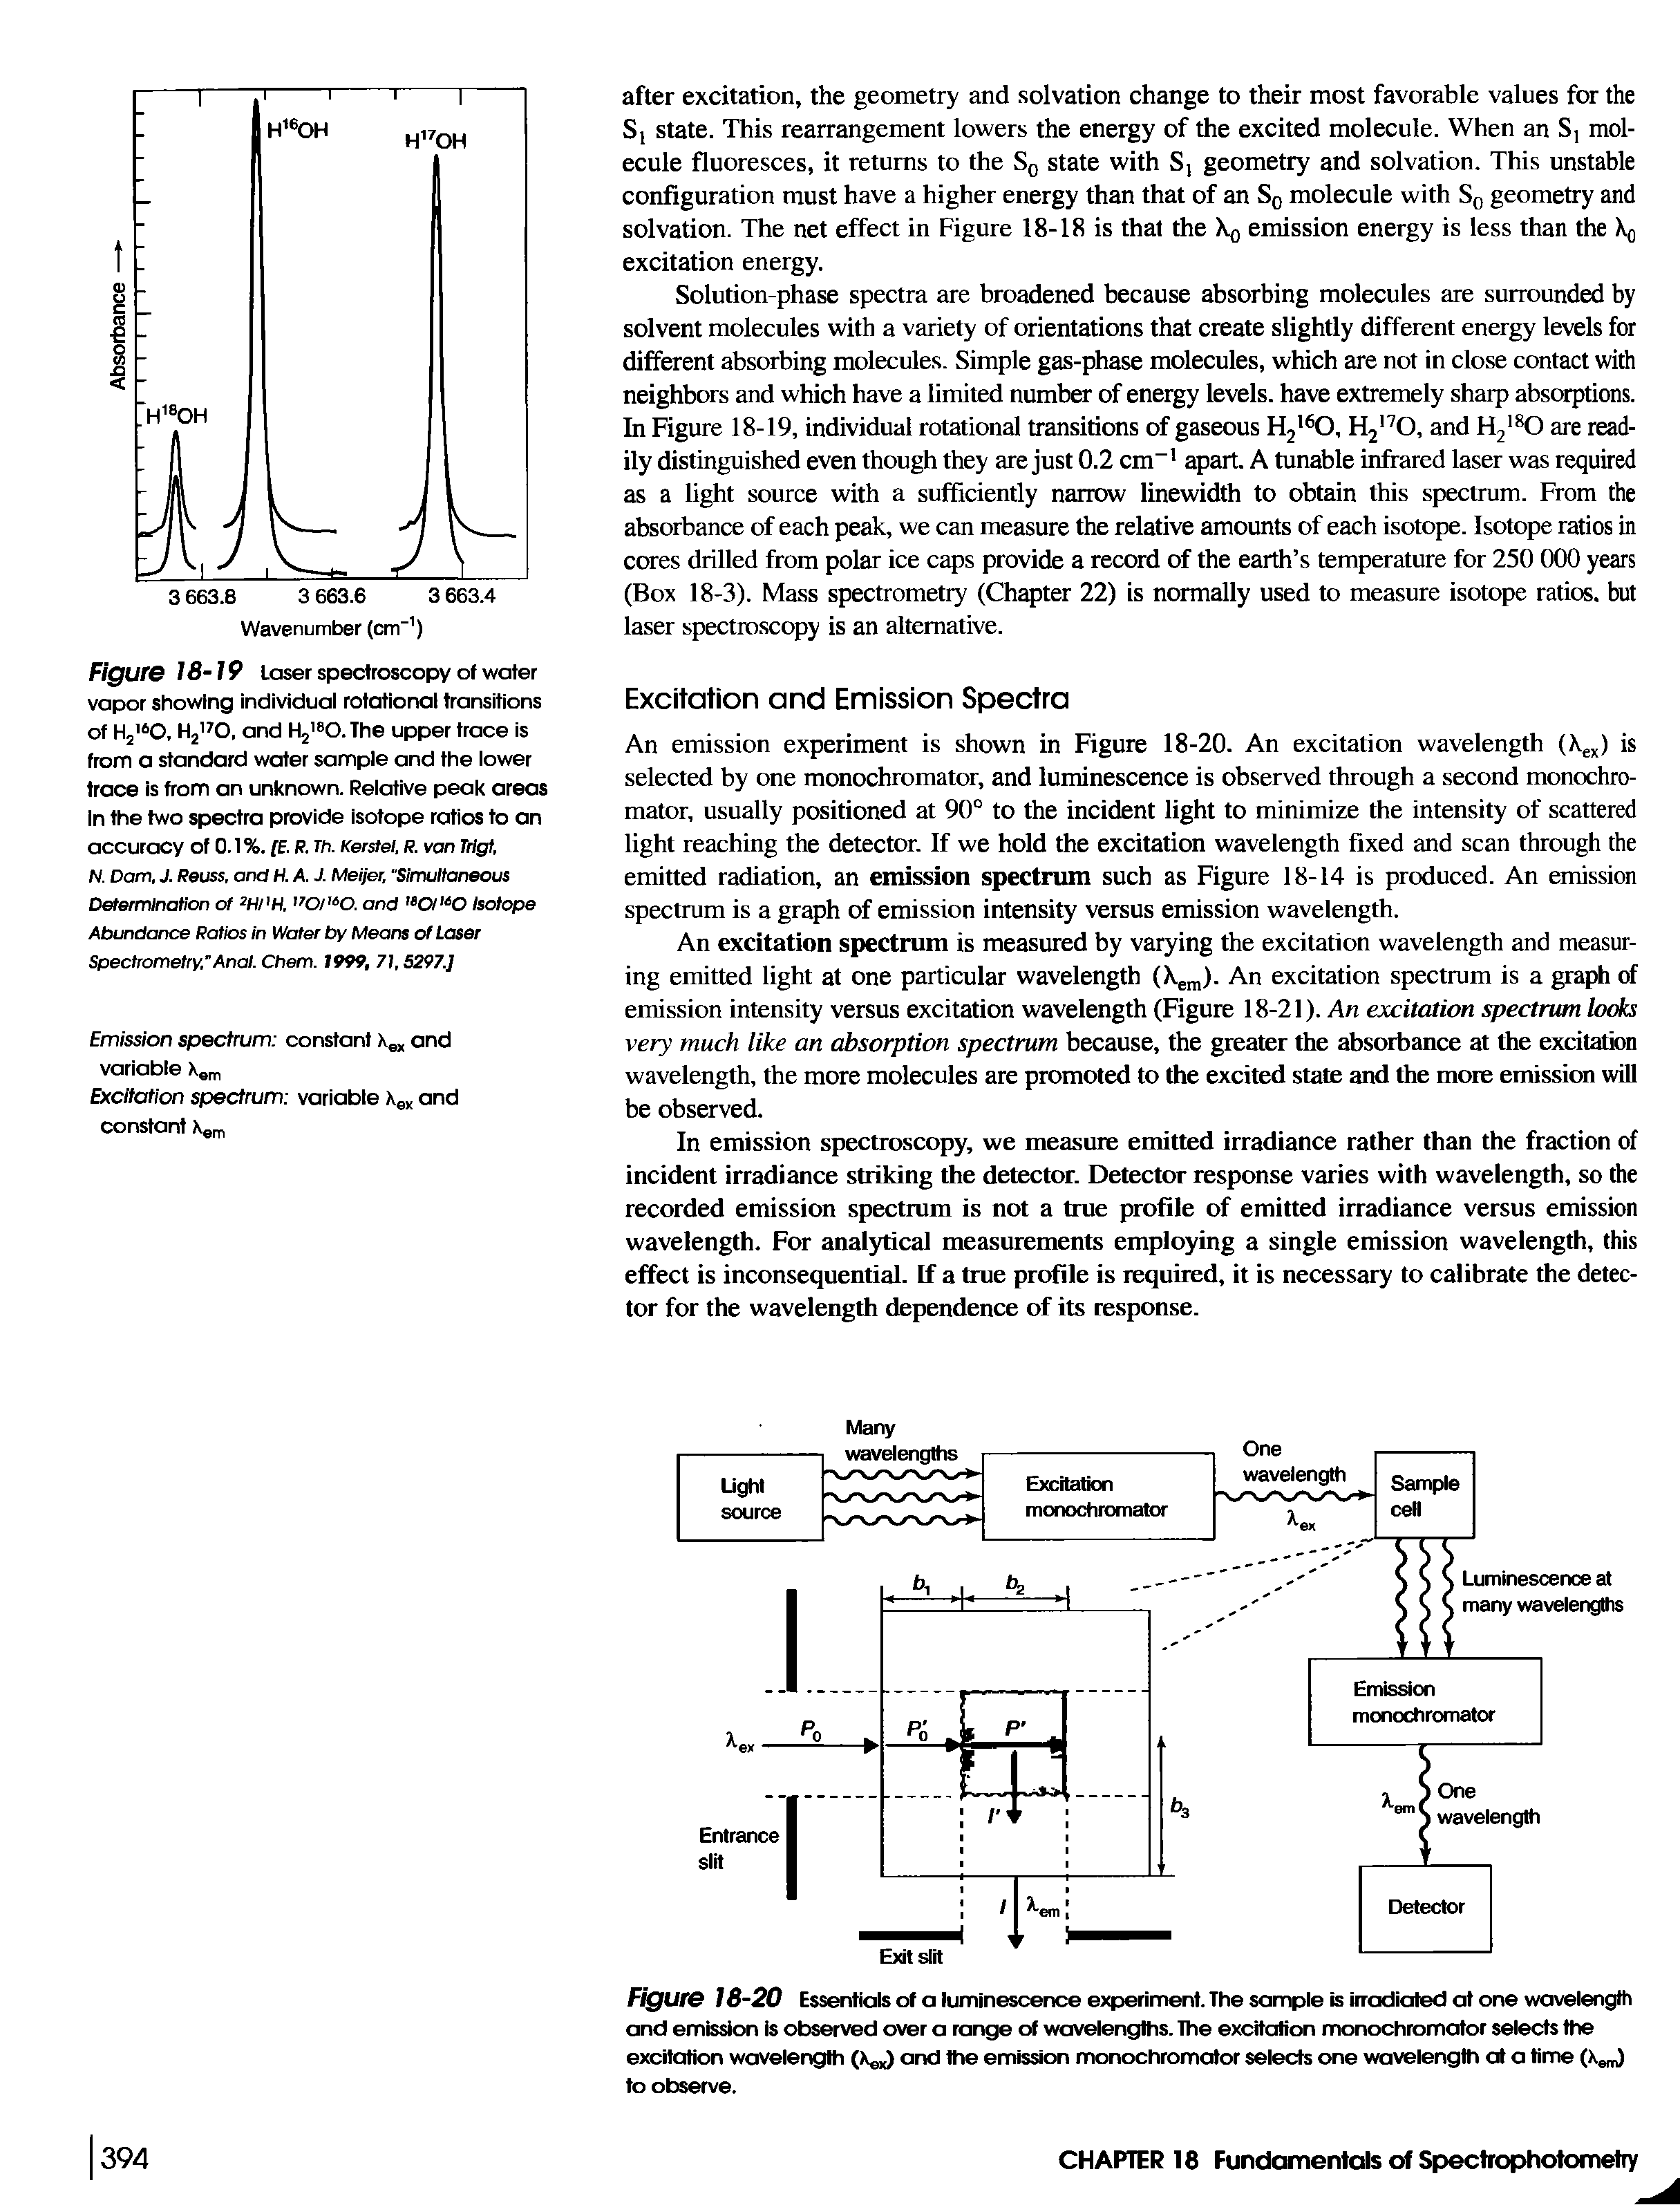 Figure 18-20 Essentials of a luminescence experiment. The sample is irradiated at one wavelength and emission is observed over a range of wavelengths. The excitation monochromator selects the excitation wavelength (X ) and the emission monochromator selects one wavelength at a time (Xem) to observe.